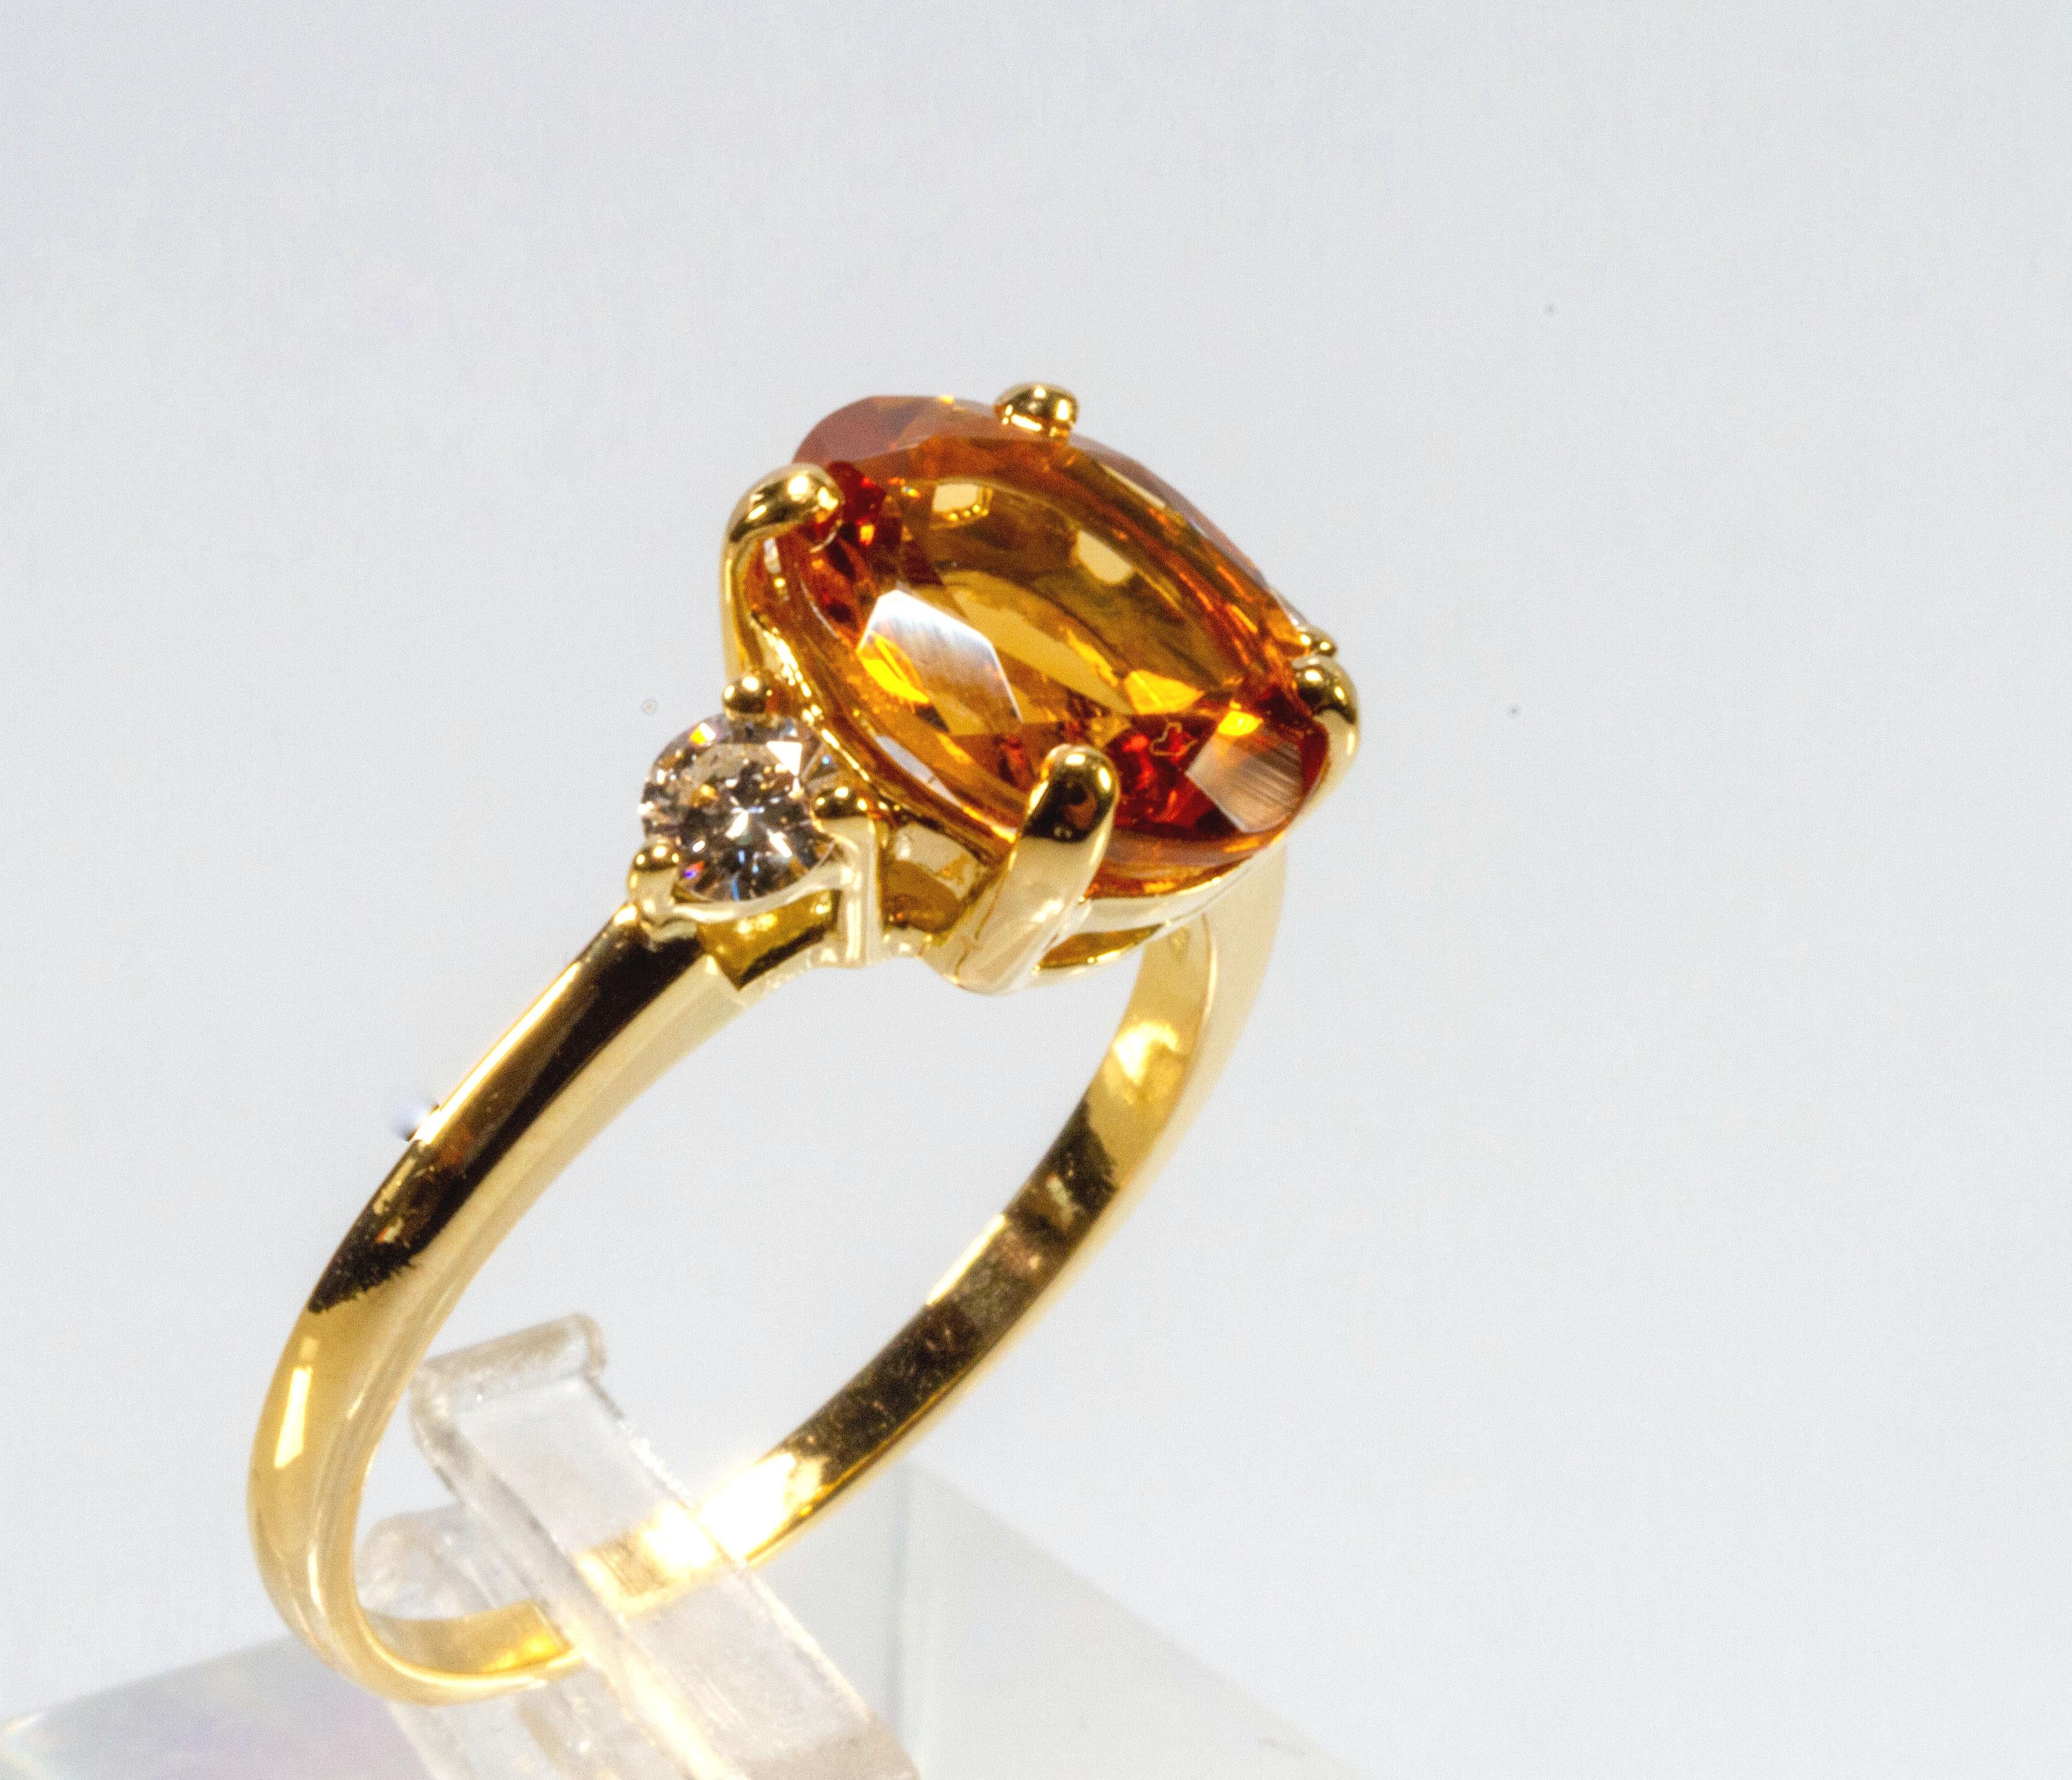 Pretty ring in 18-carat yellow gold with splendid faceted citrine enriched by two diamonds placed on both sides of the ring.
This citrine quartz was extracted from mines in Brazil, and is characterized by a bright yellow hue.
The two diamonds placed